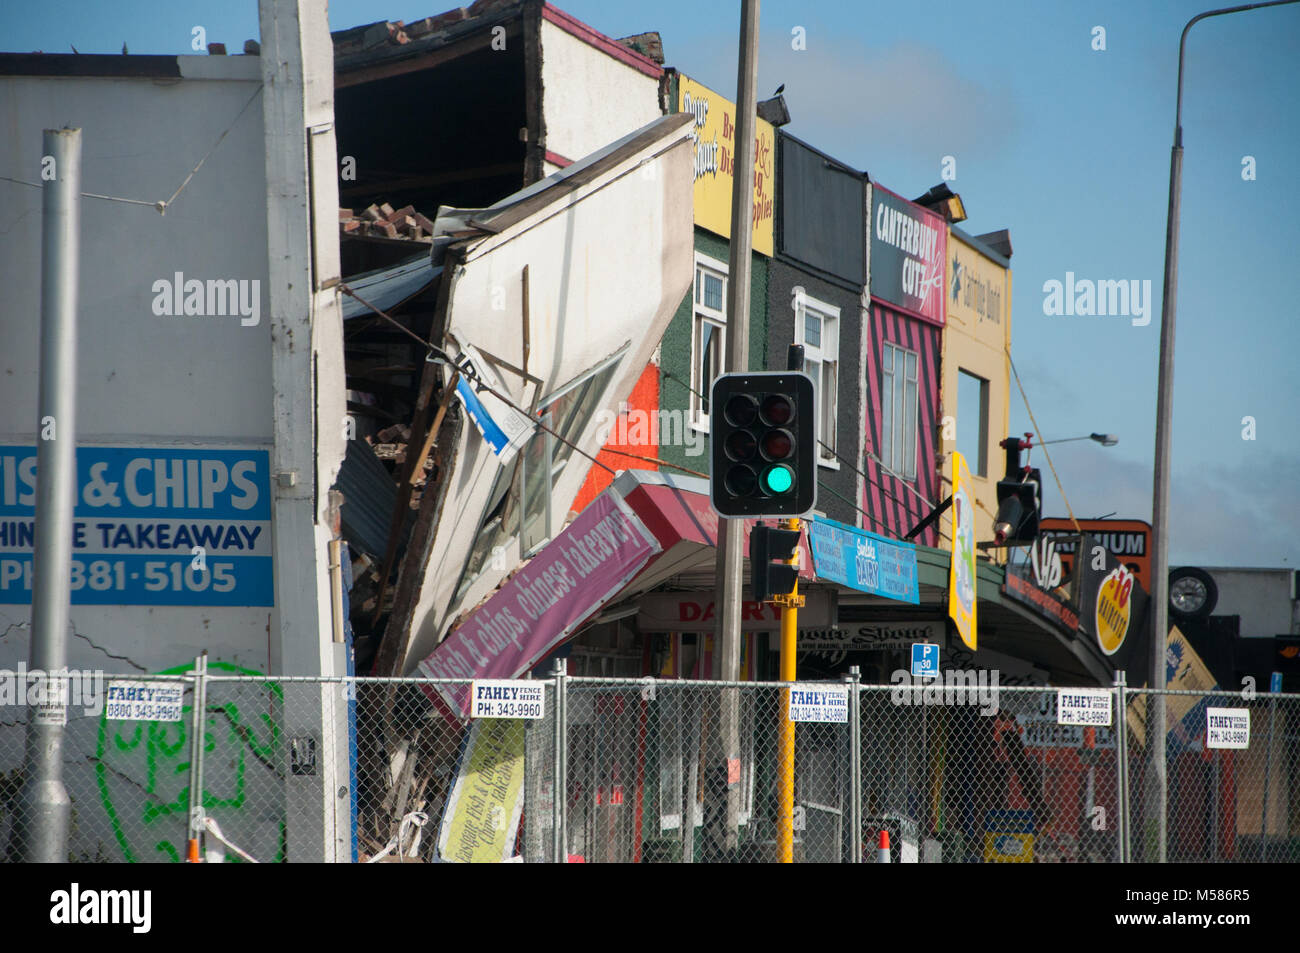 Earthquake Damaged Shops In Christchurch Stock Photo